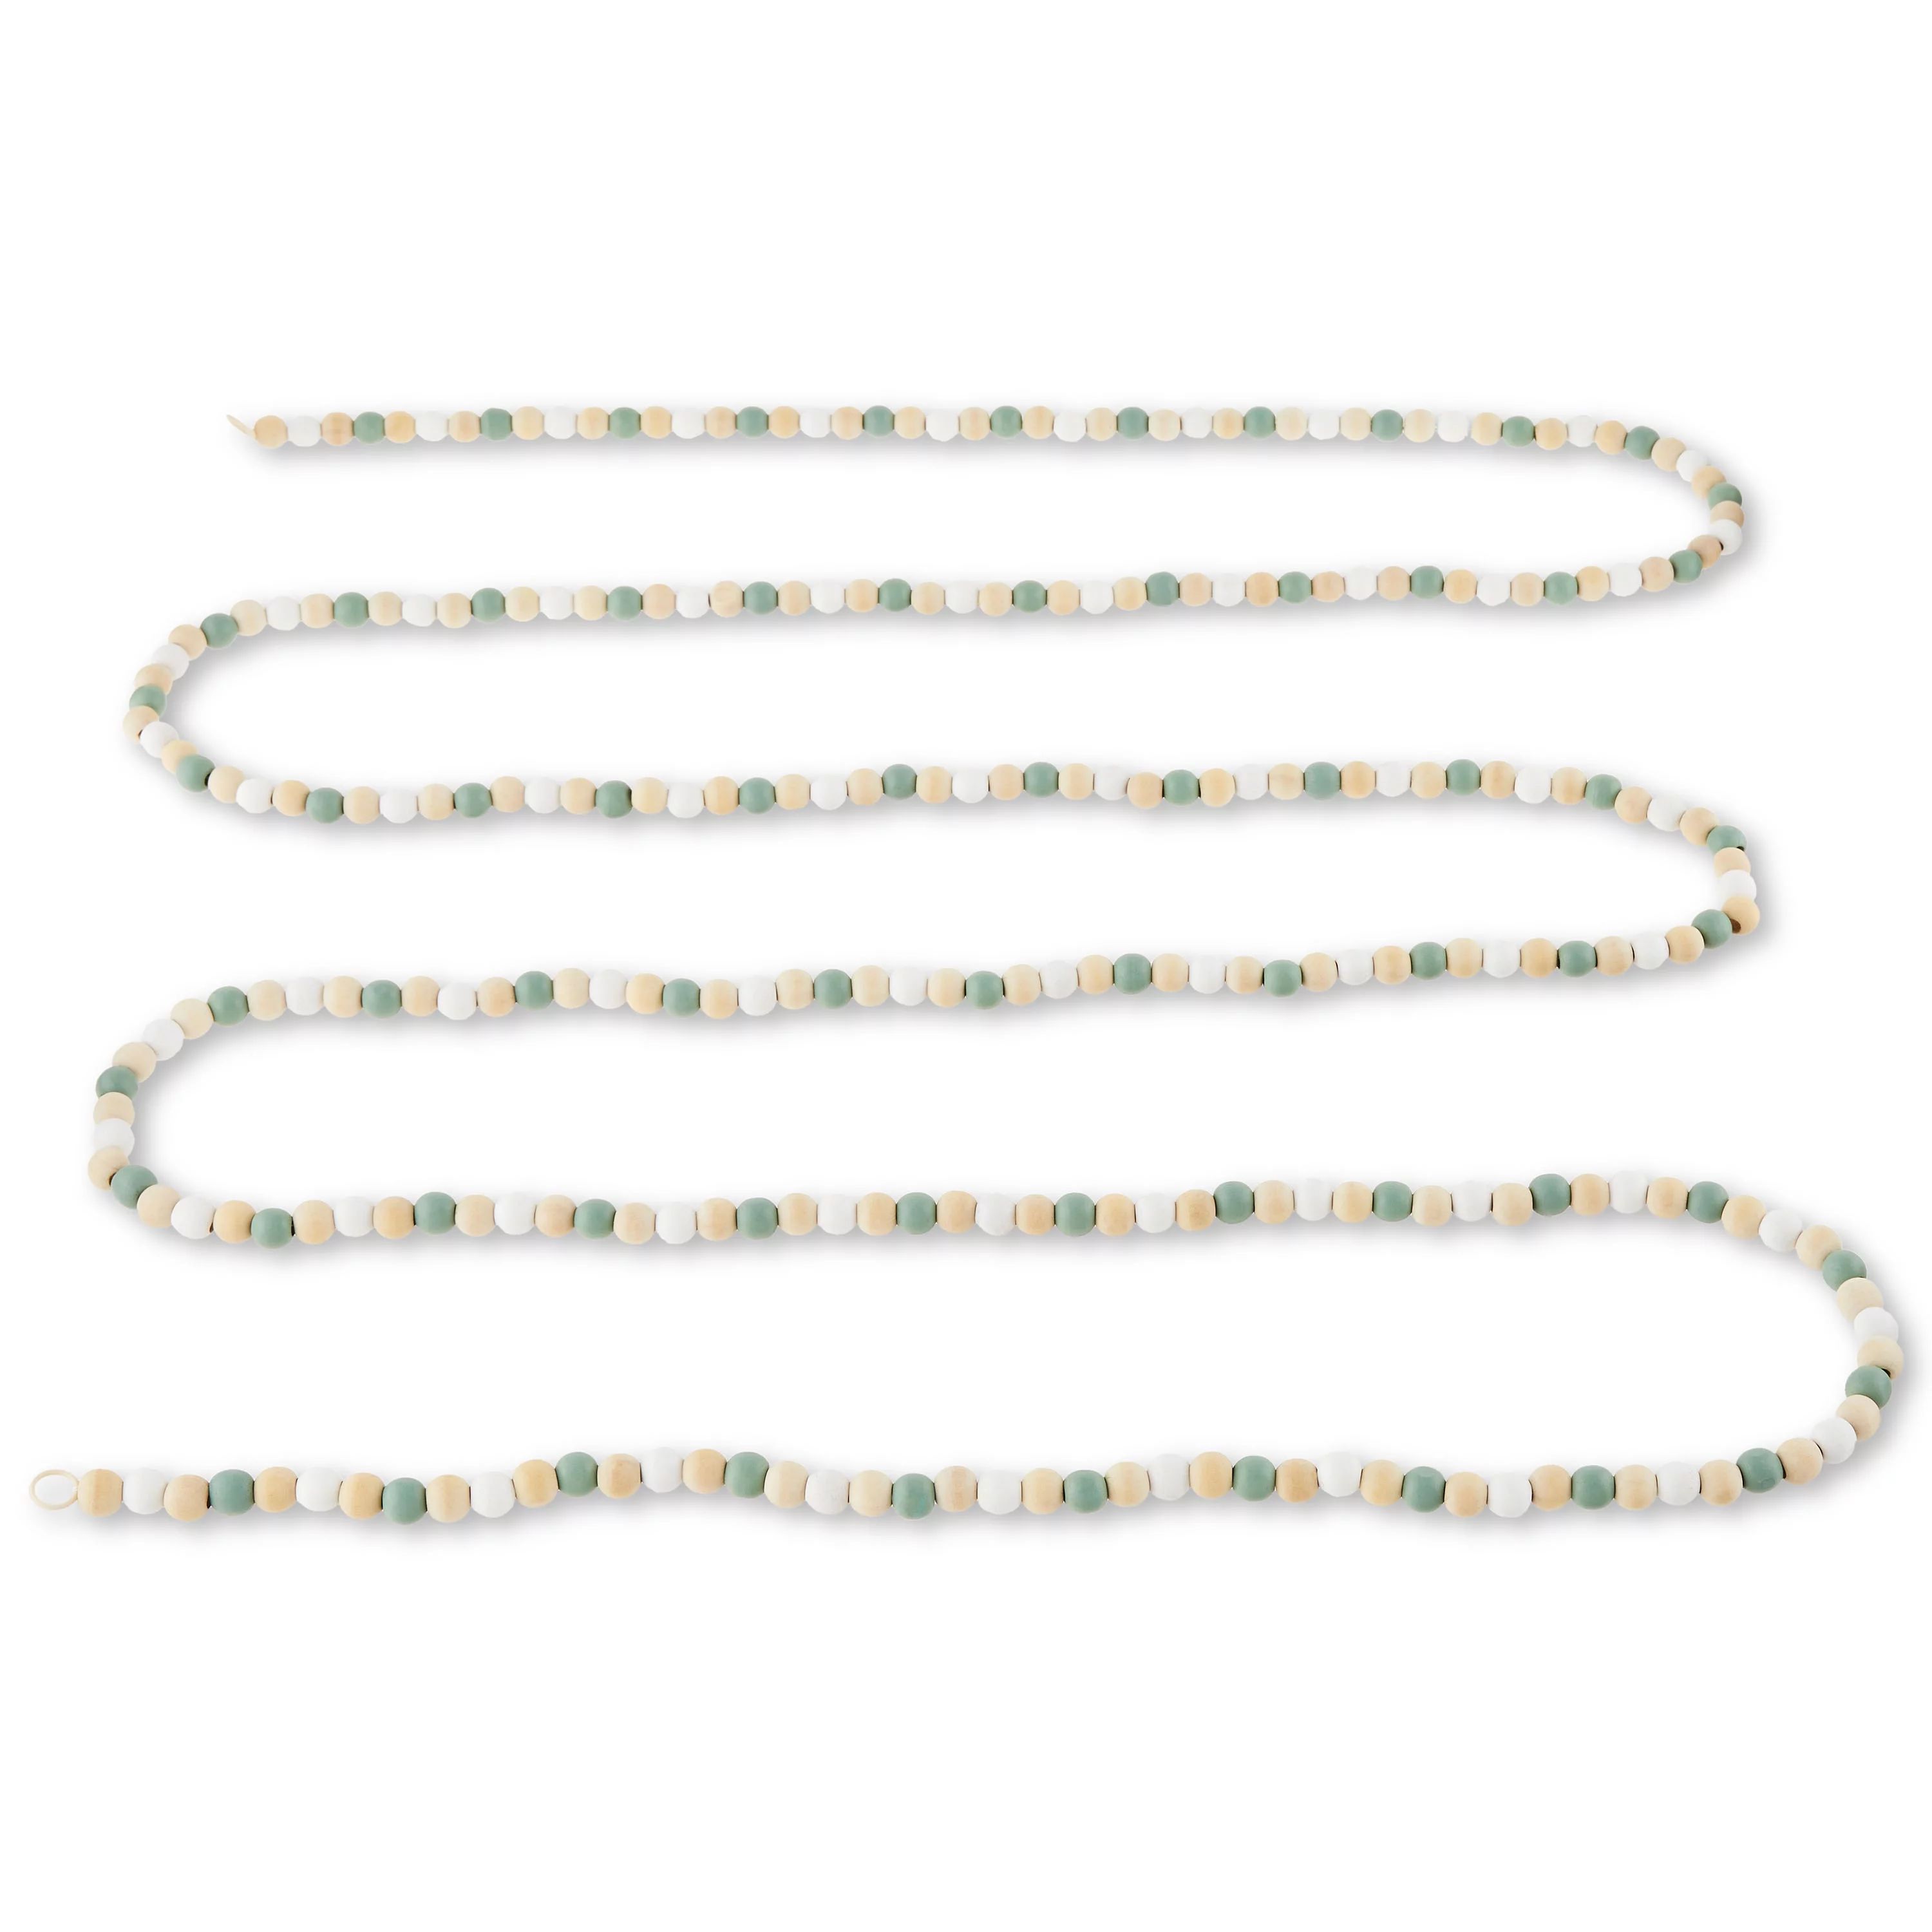 Multicolor Wooden Bead Garland, 12', by Holiday Time | Walmart (US)